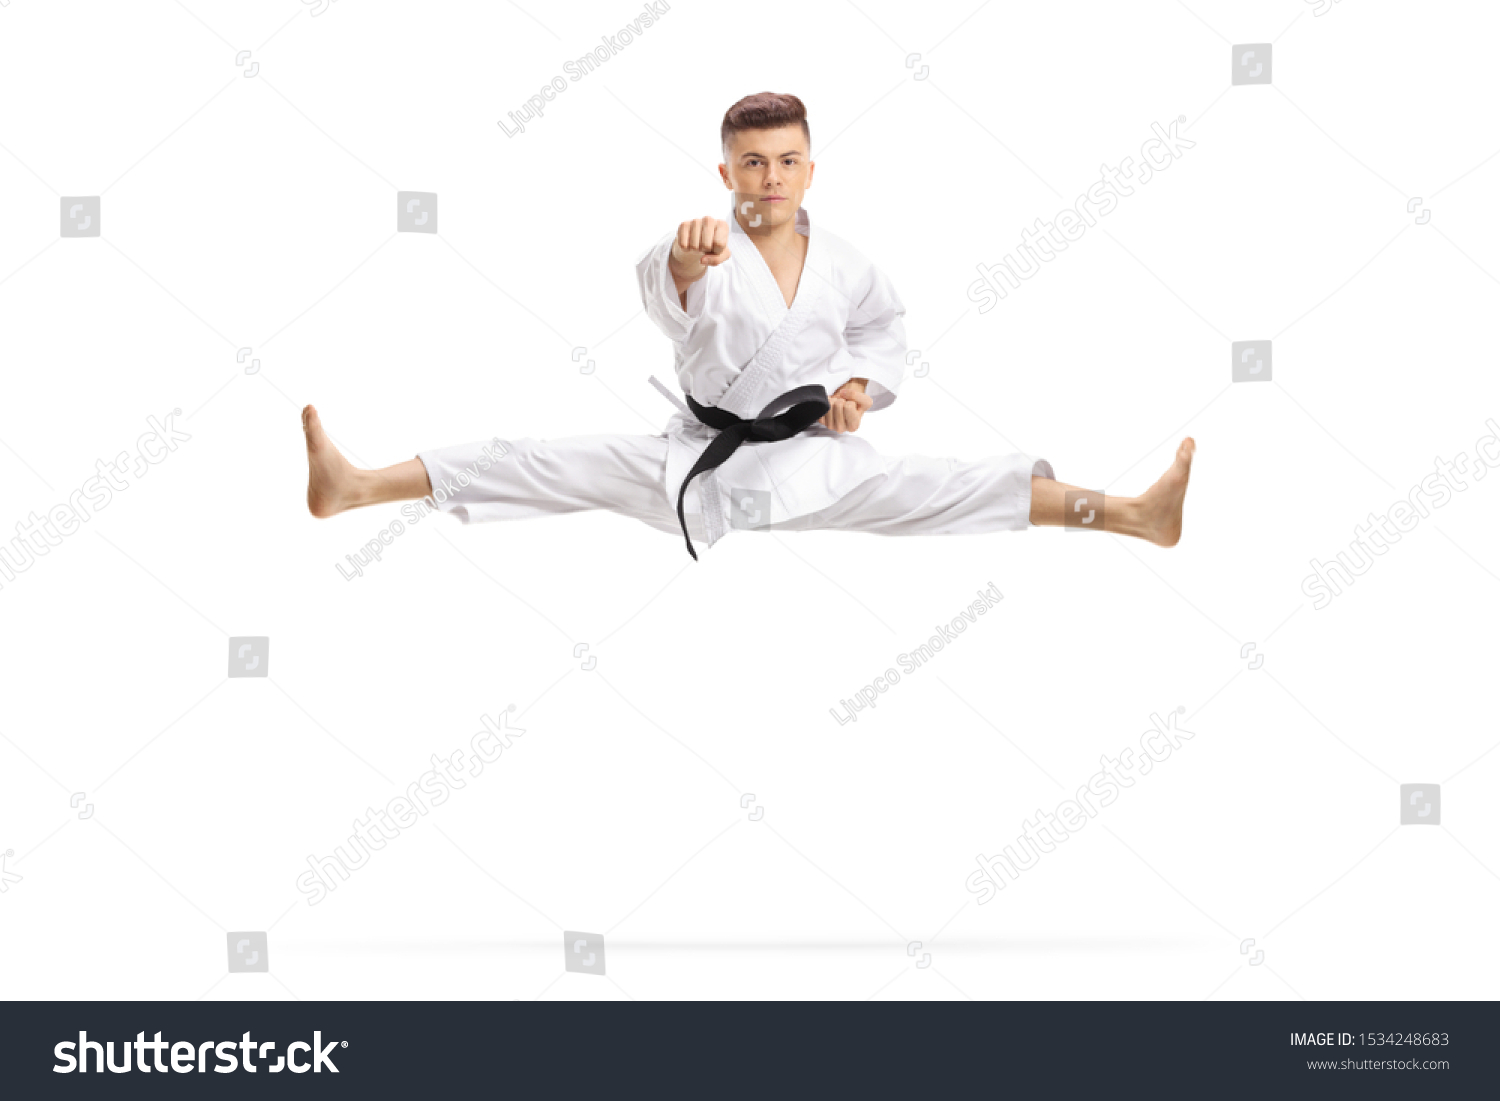 Guy in kimono jumping and doing martial art split isolated on white background #1534248683